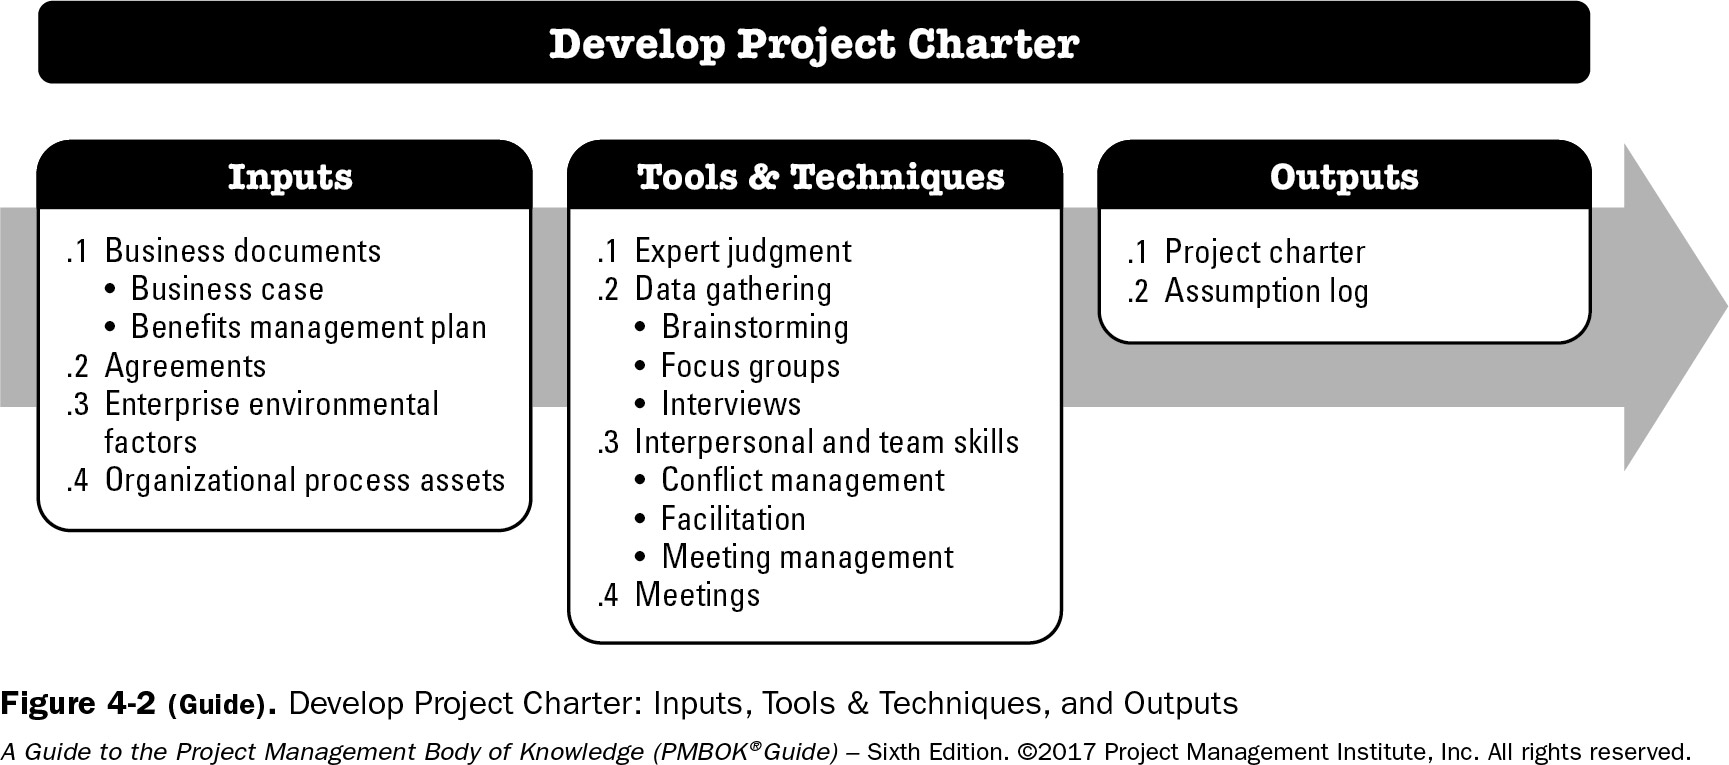 Inputs Tools Techniques and Outputs for Develop Project Charger